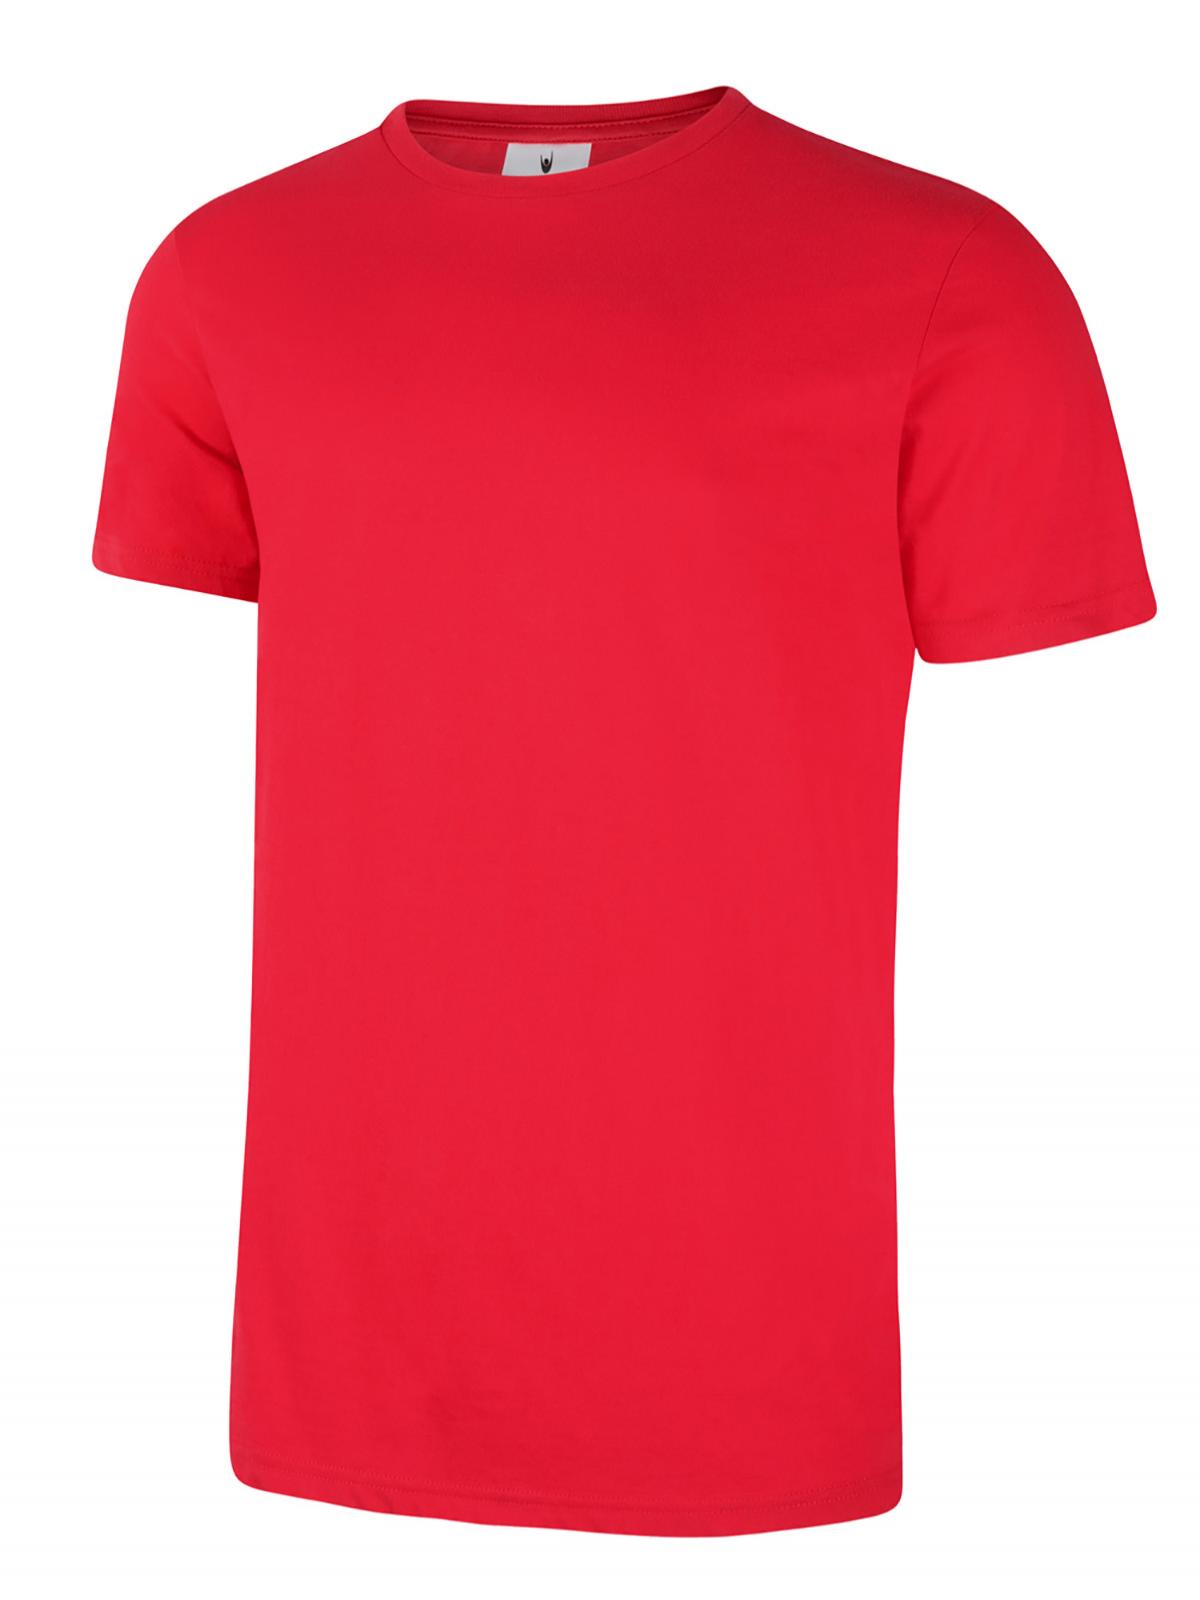 Uneek Olympic T-shirt UC320 - Red